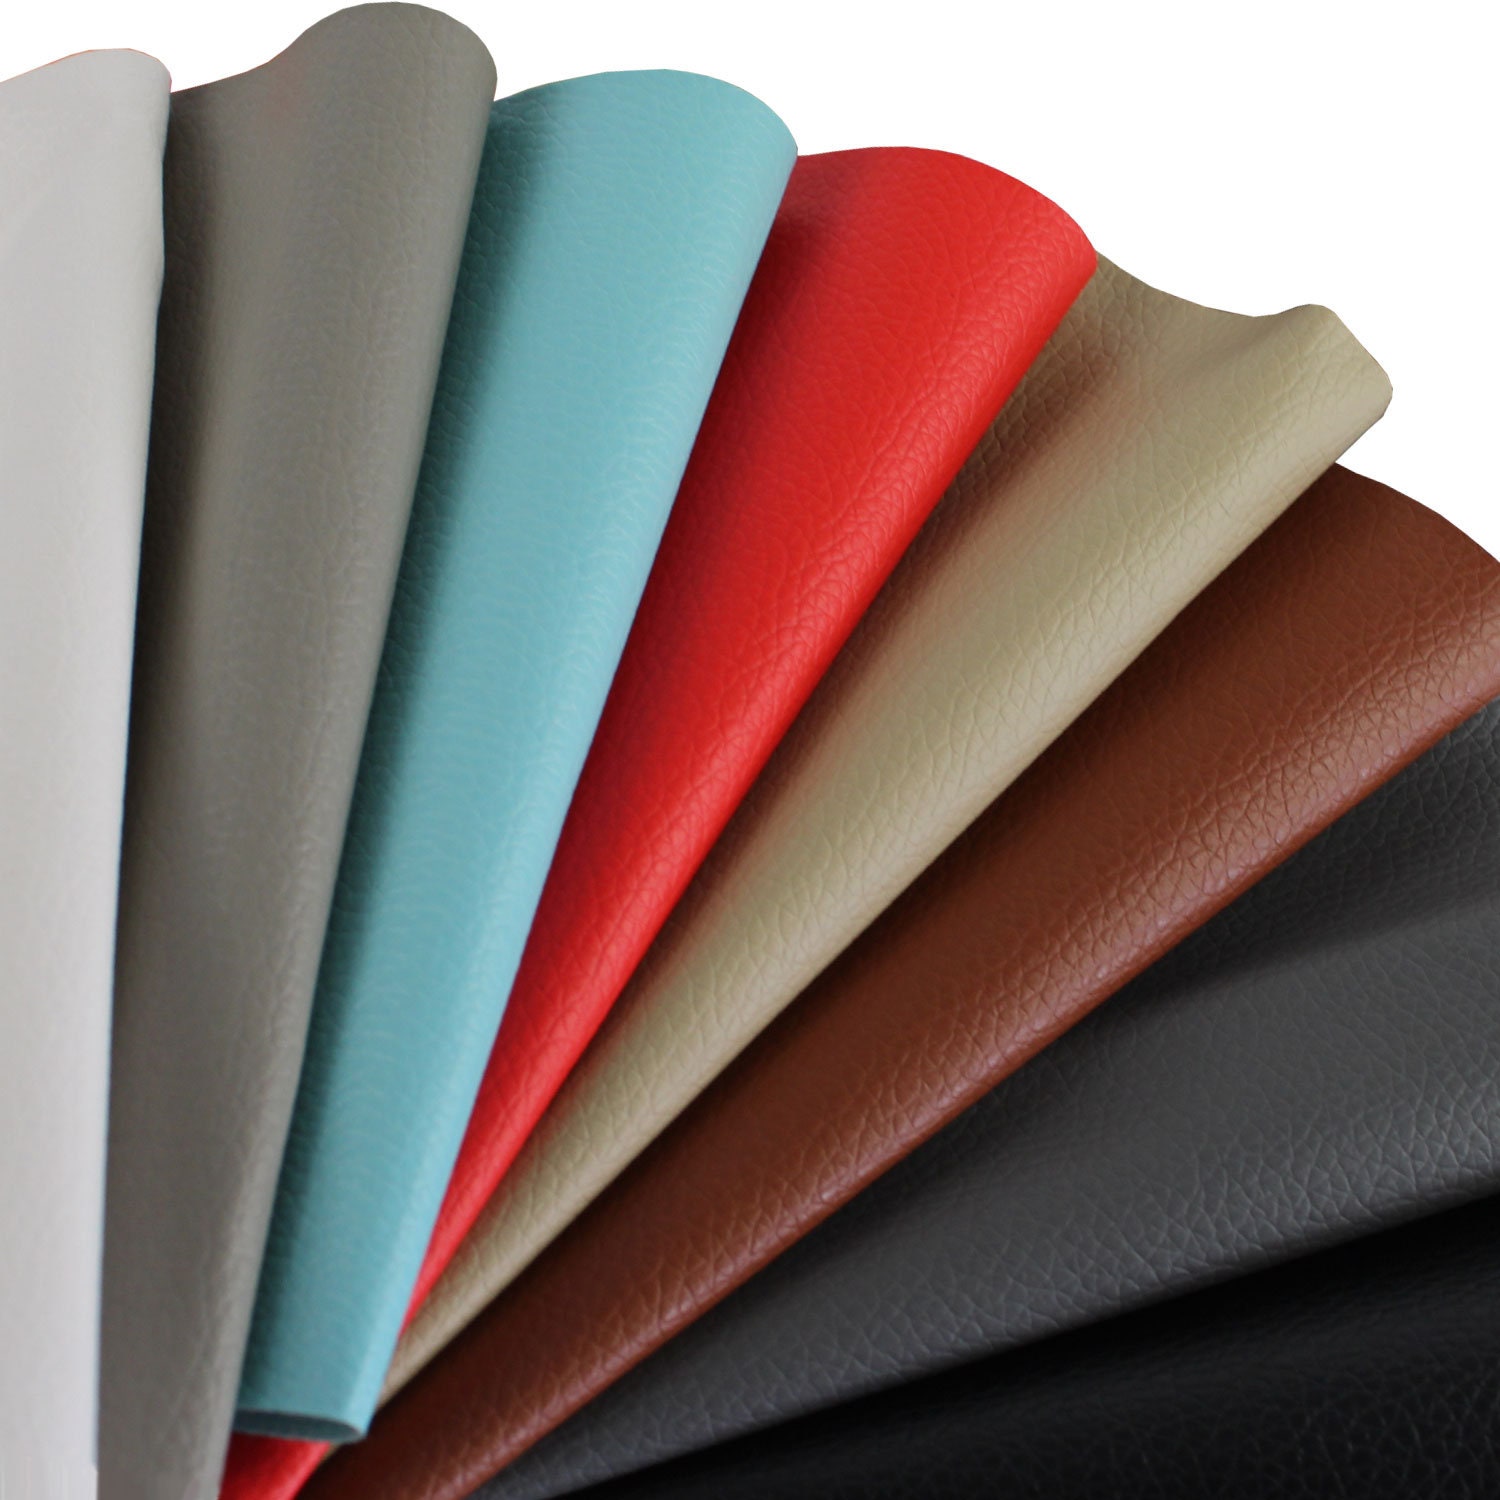 36 x 55inch 1 Yard Faux Leather Fabric Sheets Car Boat Textile Synthetic Leathre Durability Leatherette Marine Vinyl Fabri warm&soft Touch, Size: 54x